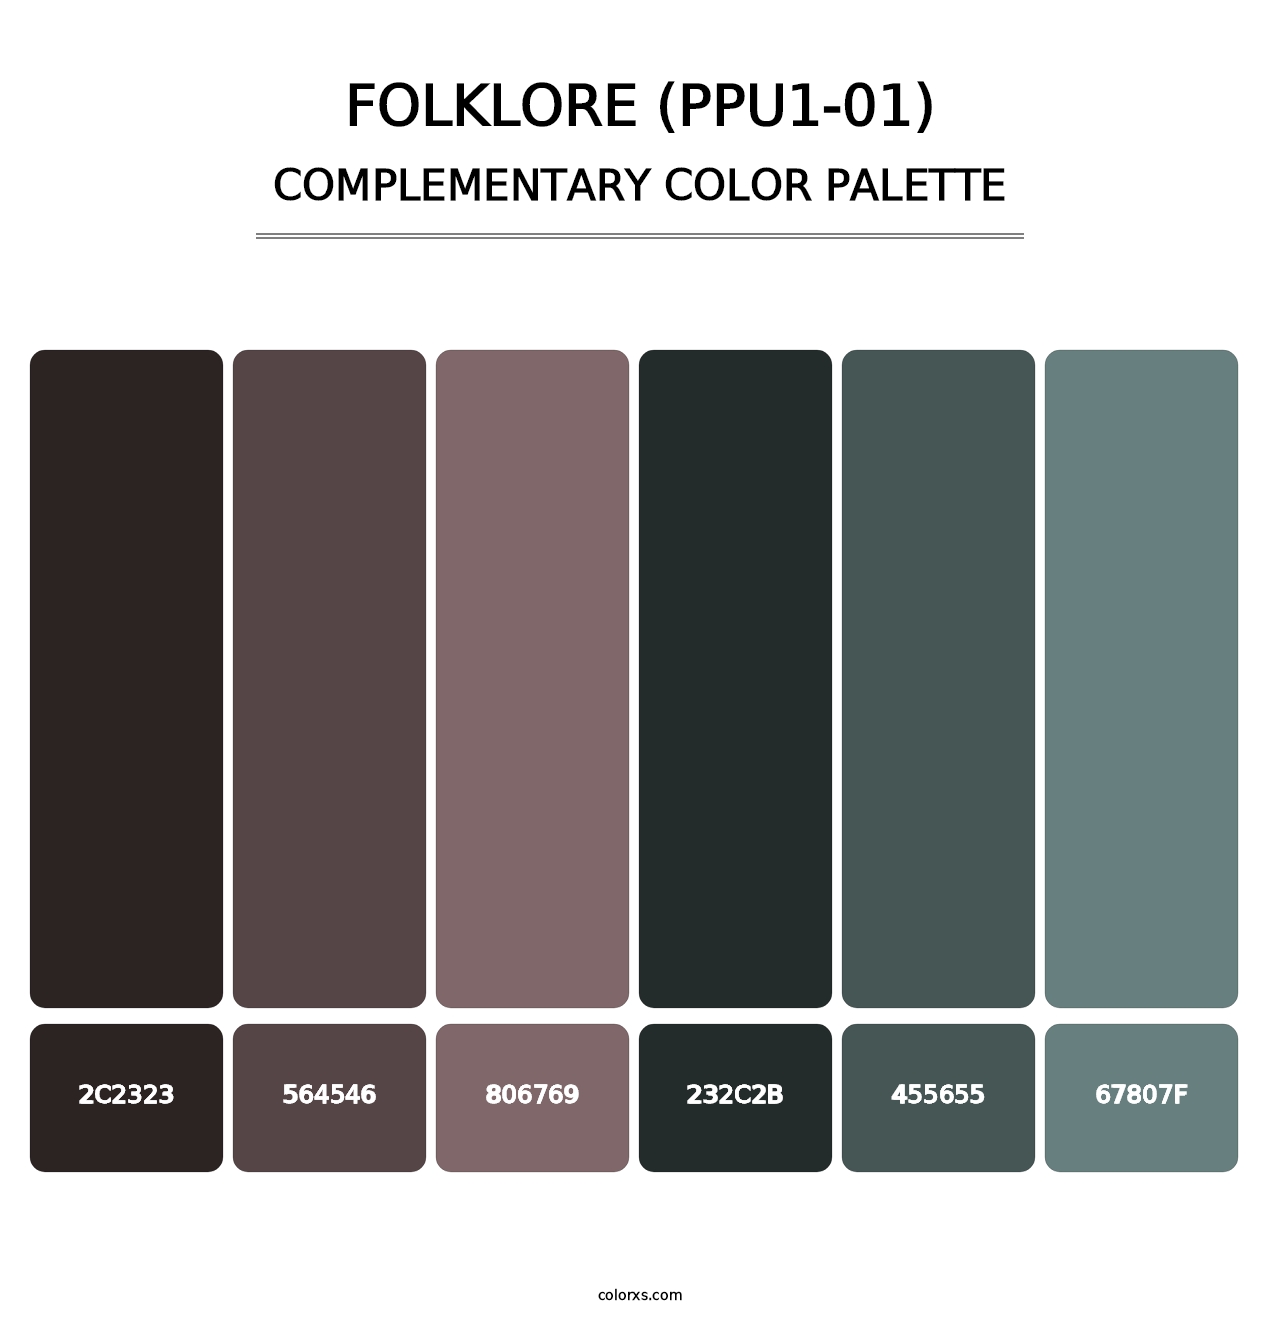 Folklore (PPU1-01) - Complementary Color Palette